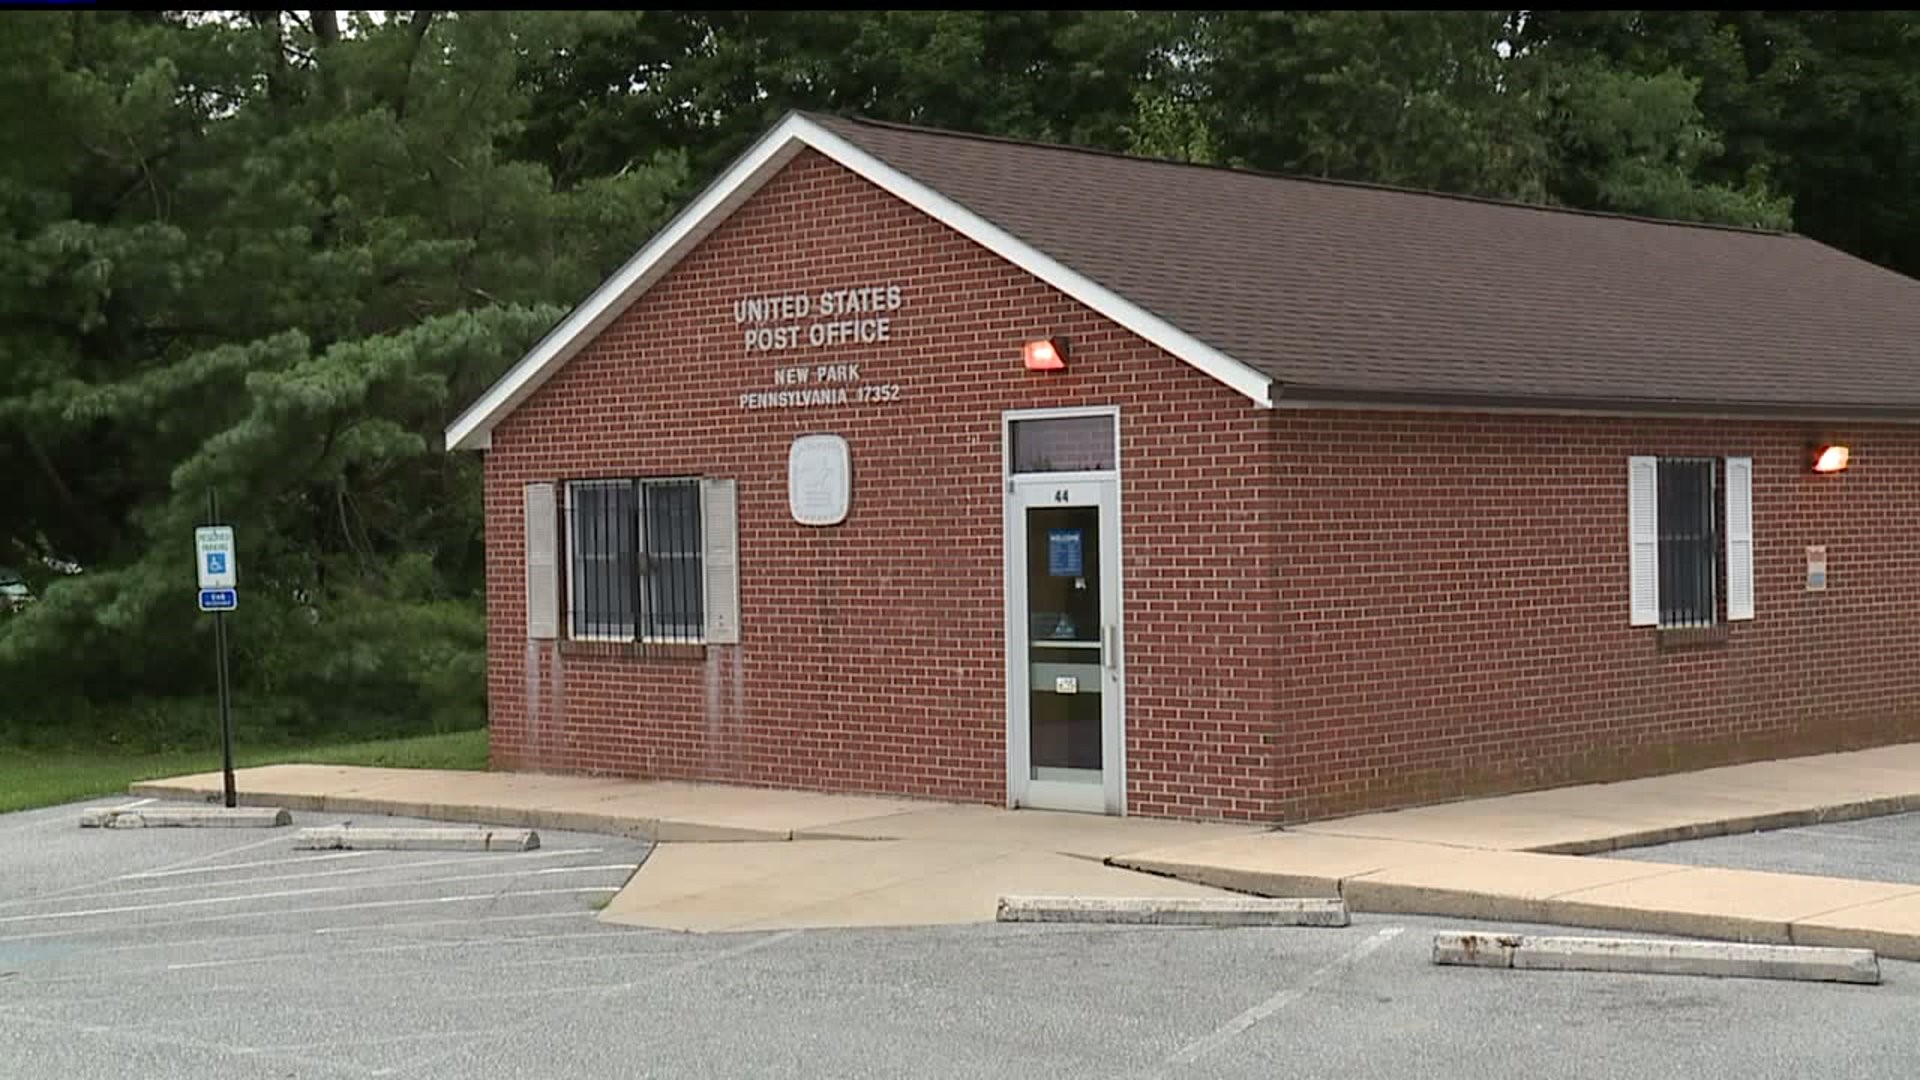 Fawn Grove, USPS to work together to replace closed post office